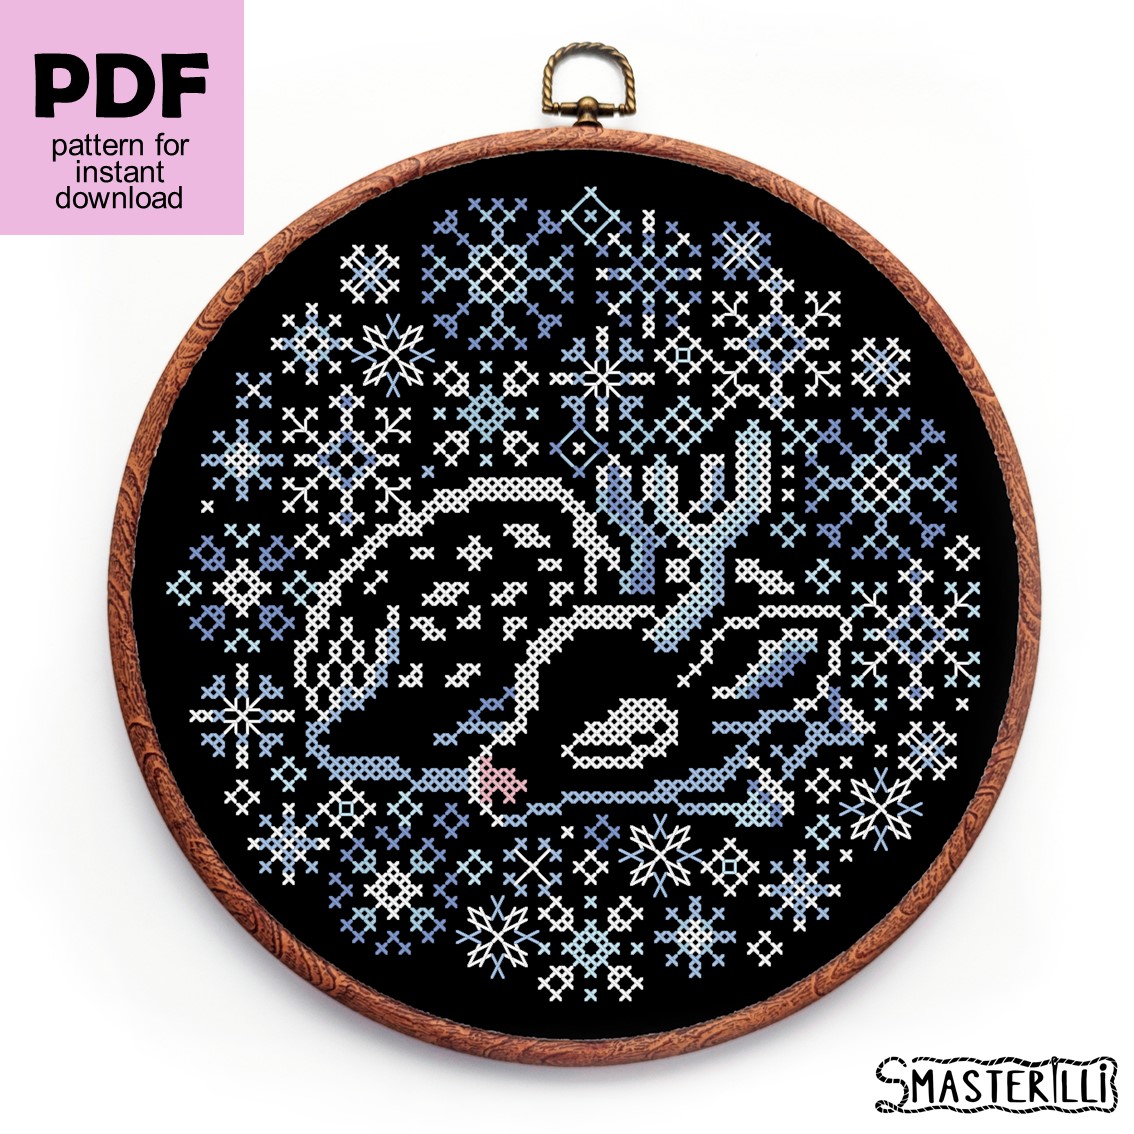 Cross Stitch Christmas Ornament Pattern, Digital Download Pdf, Snowflake,  Nordic Reindeer, Counted Cross Stitch Pattern for Beginners 